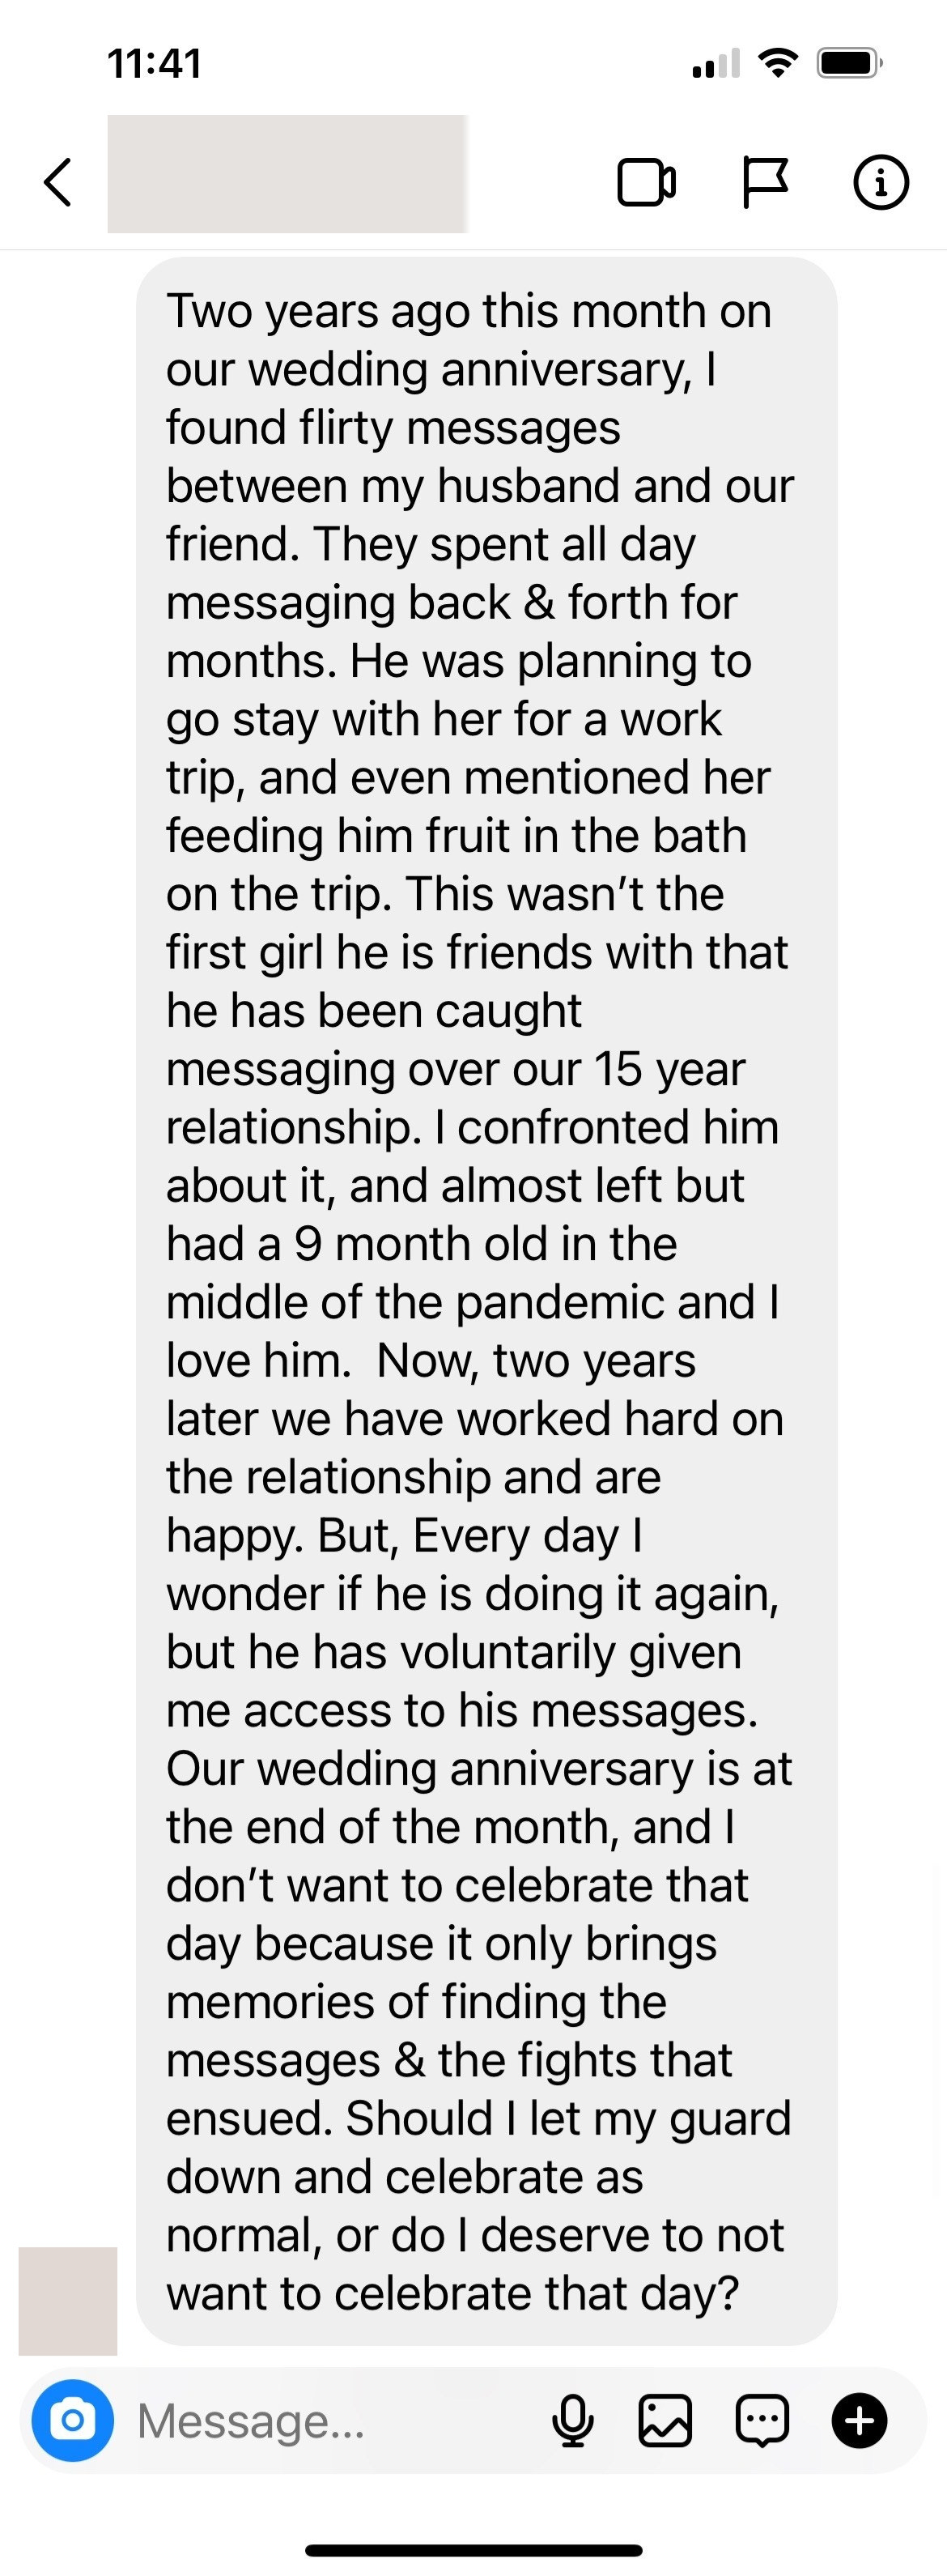 DM from the woman who caught her husband sending flirty messages